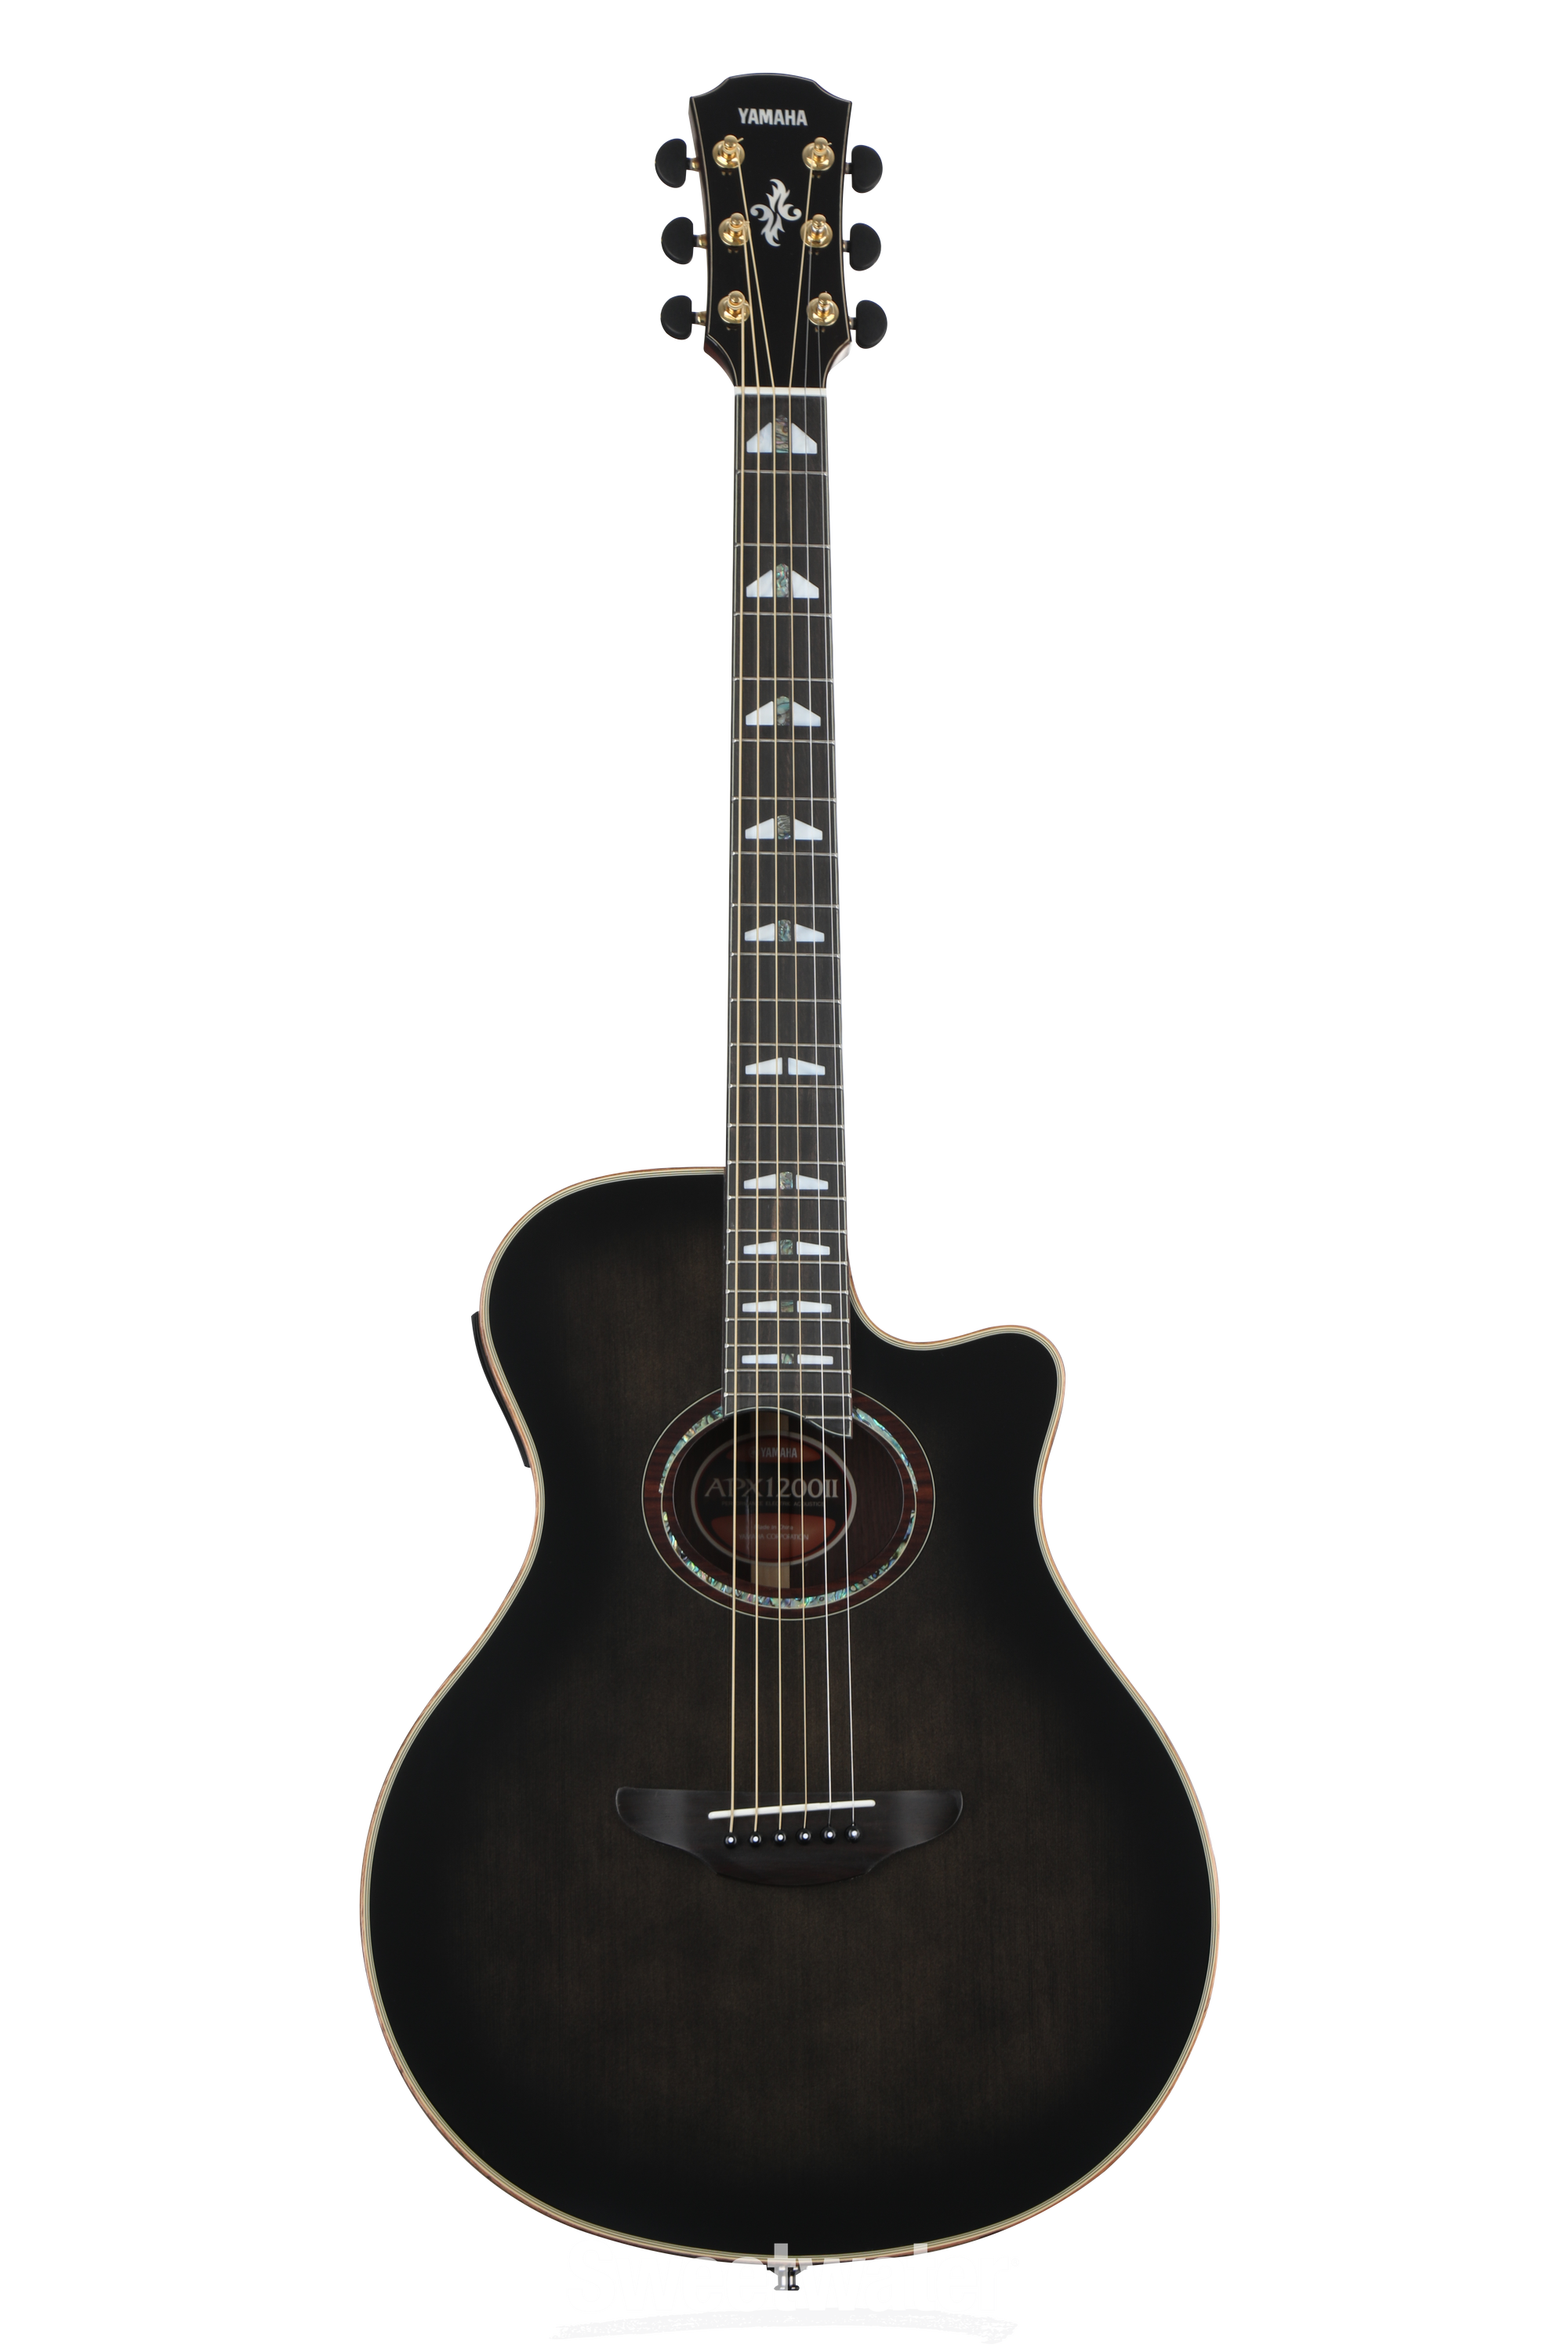 Yamaha APX1200II Acoustic-Electric Guitar - Translucent Black | Sweetwater